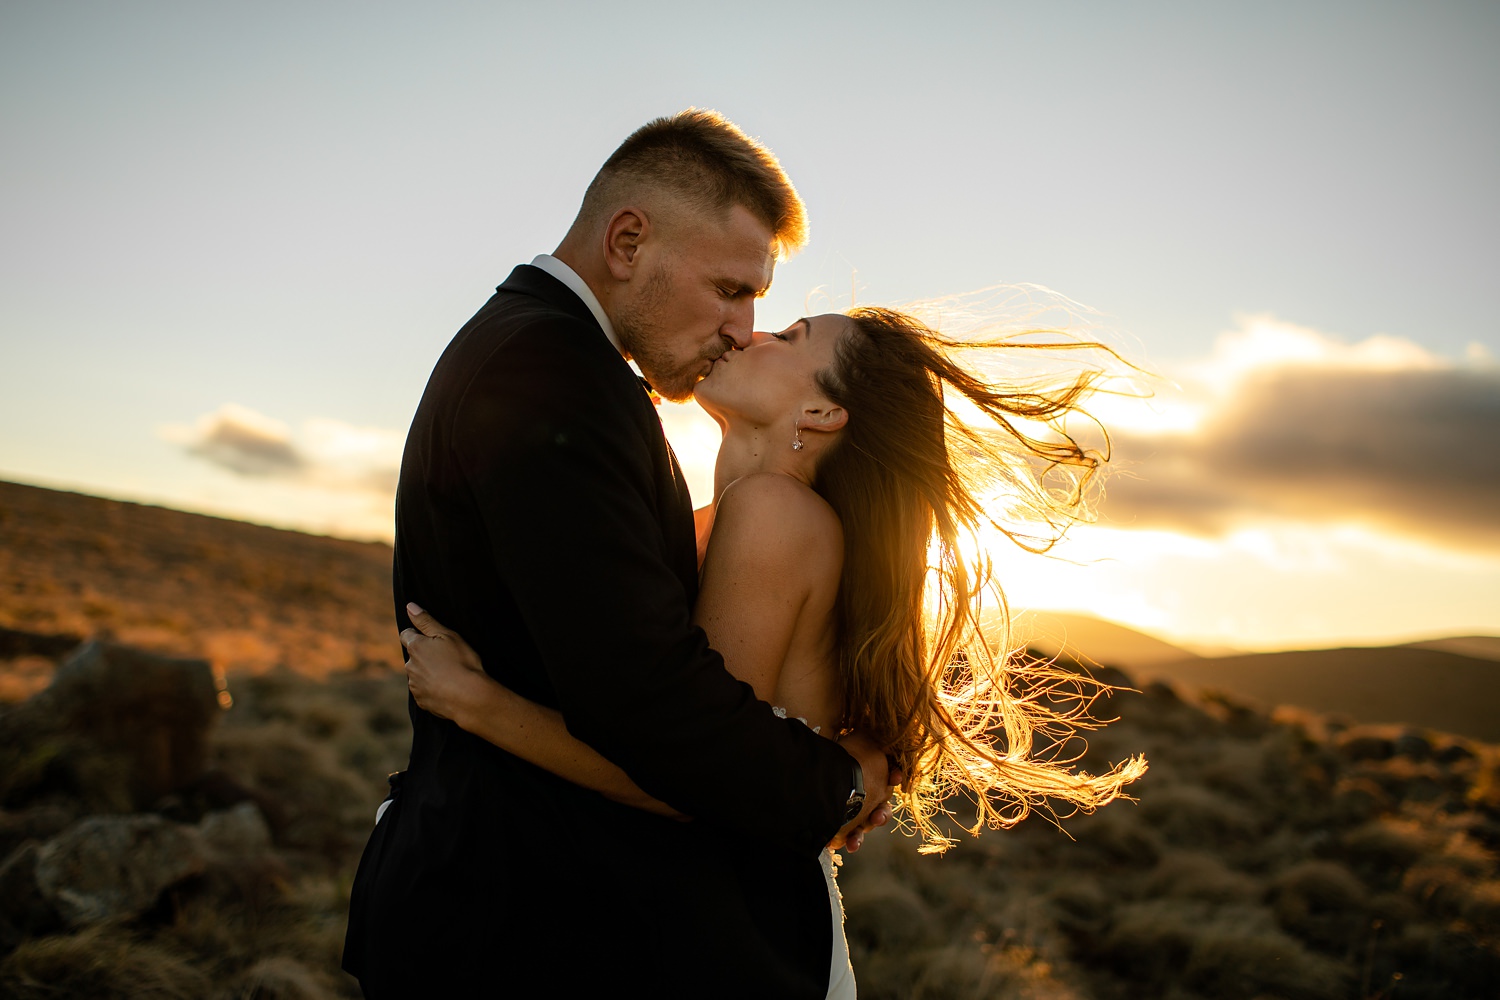 Wedding photographer in South Africa, Niki M Photography, celebrates love with a collection of images showcasing her best photographs of the year.